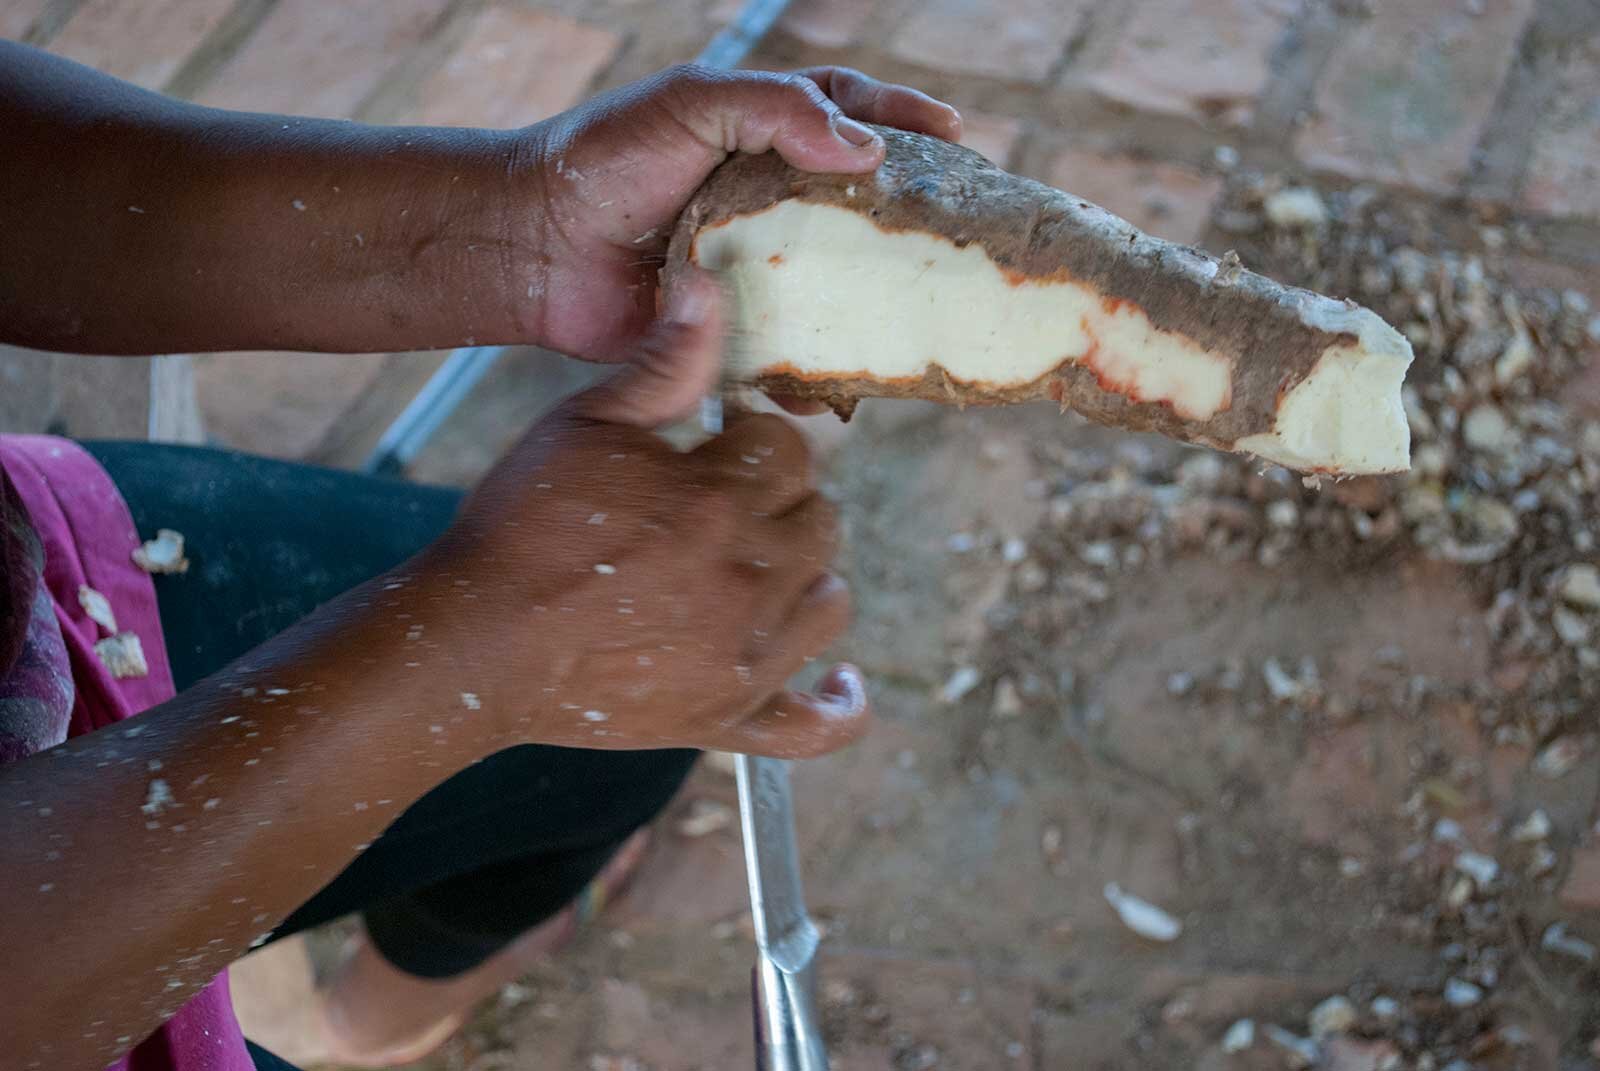  Back in the village, the process of making black tucupi begins. It’s going to take a couple of days all in, and is work traditionally done by women. First up, peeling the manioc.  Photo © Tina Leme Scott  